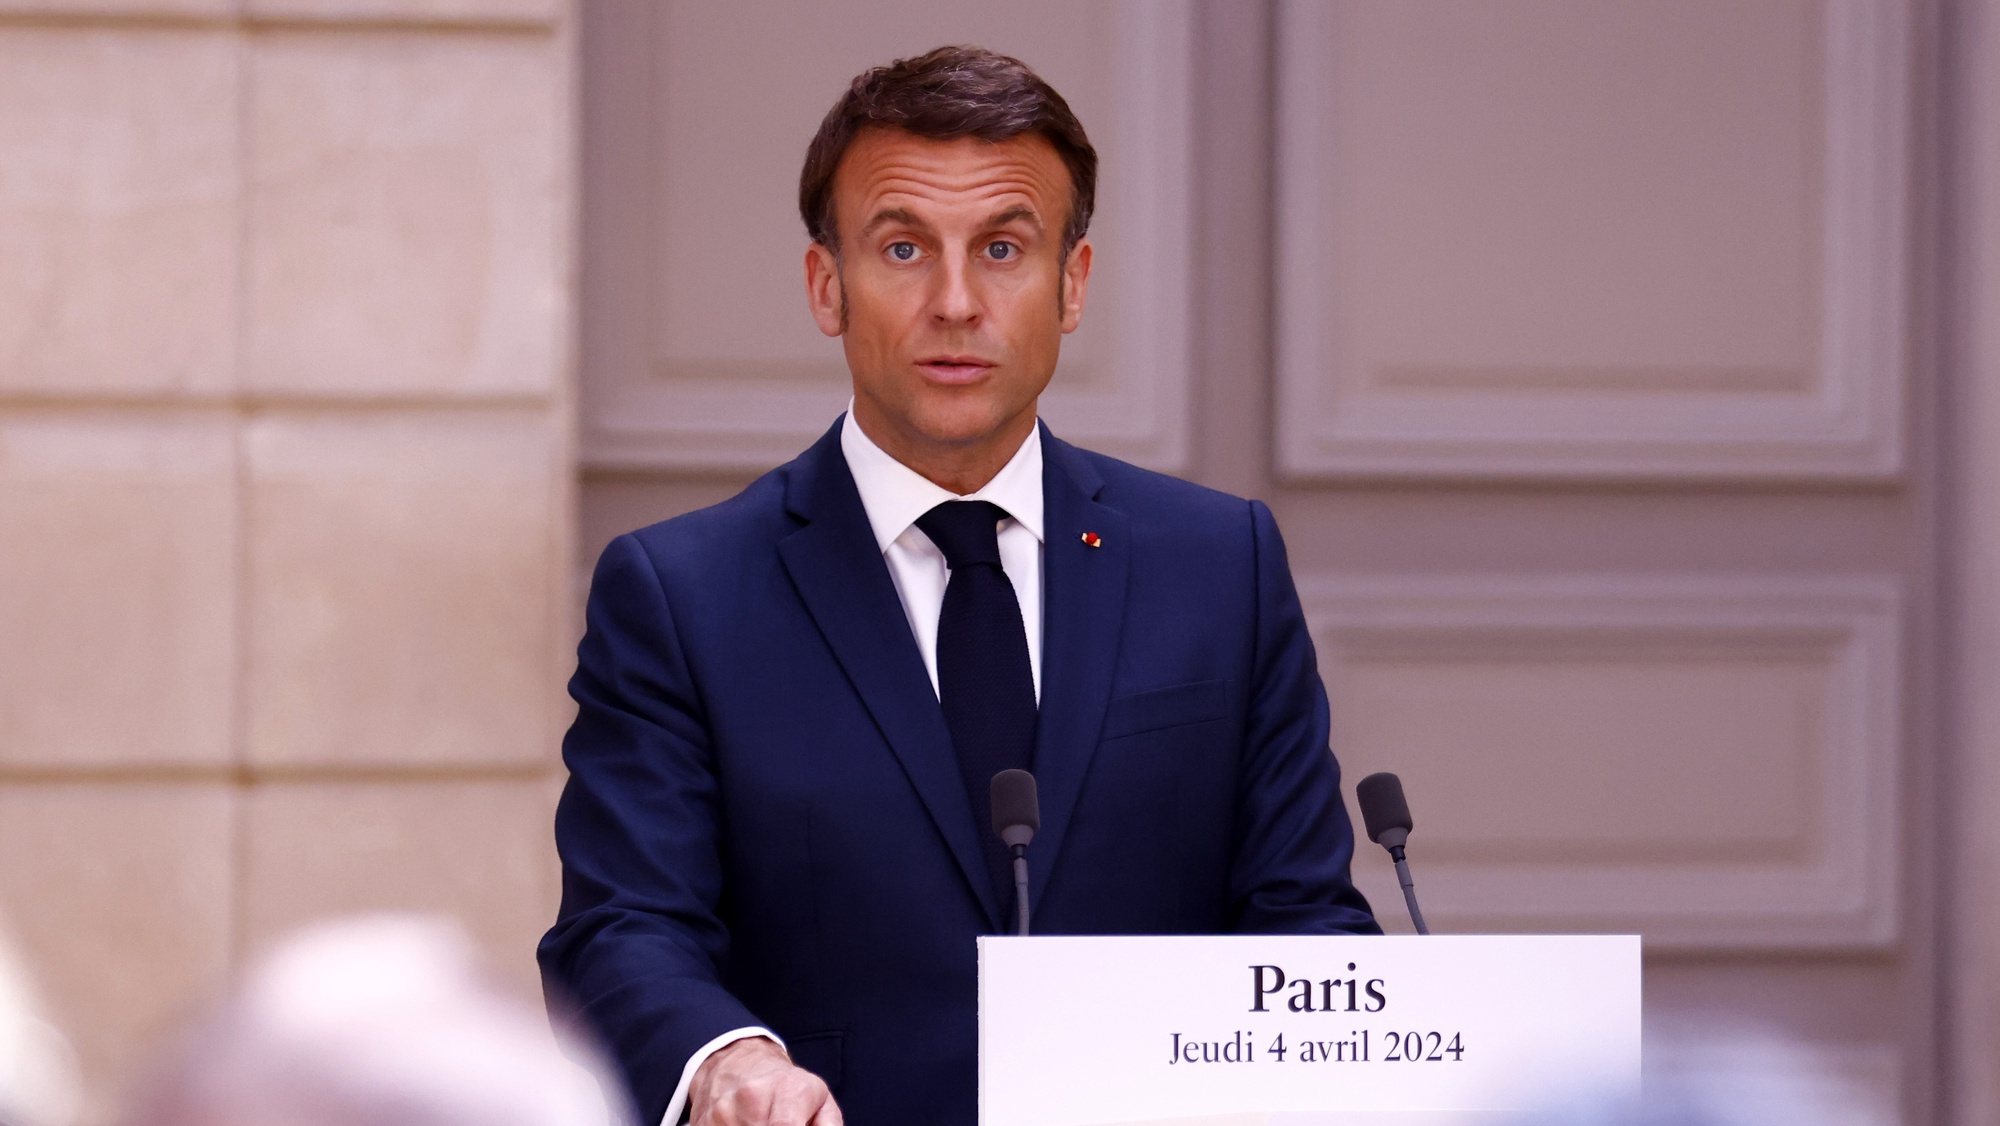 epa11258655 French President Emmanuel Macron delivers a speech during a press conference with the Austrian chancellor before their working lunch at Elysee Palace in Paris, France, 04 April 2024.  EPA/MOHAMMED BADRA / POOL